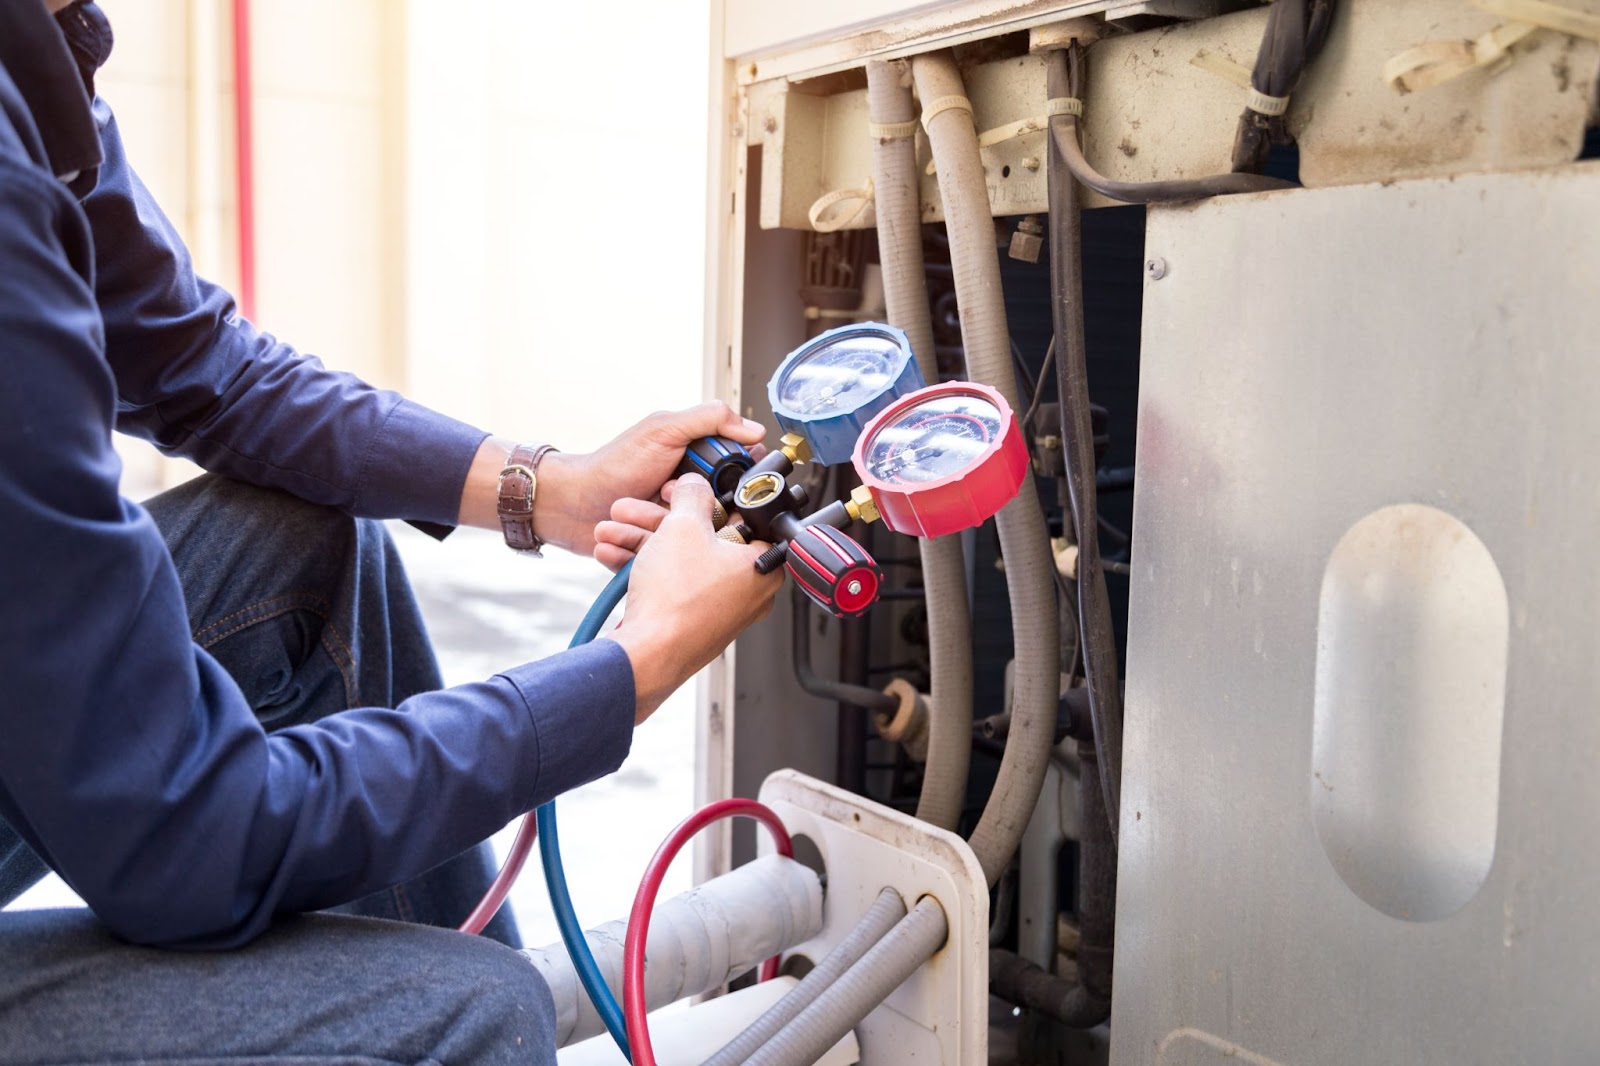 How to Become an HVAC Technician